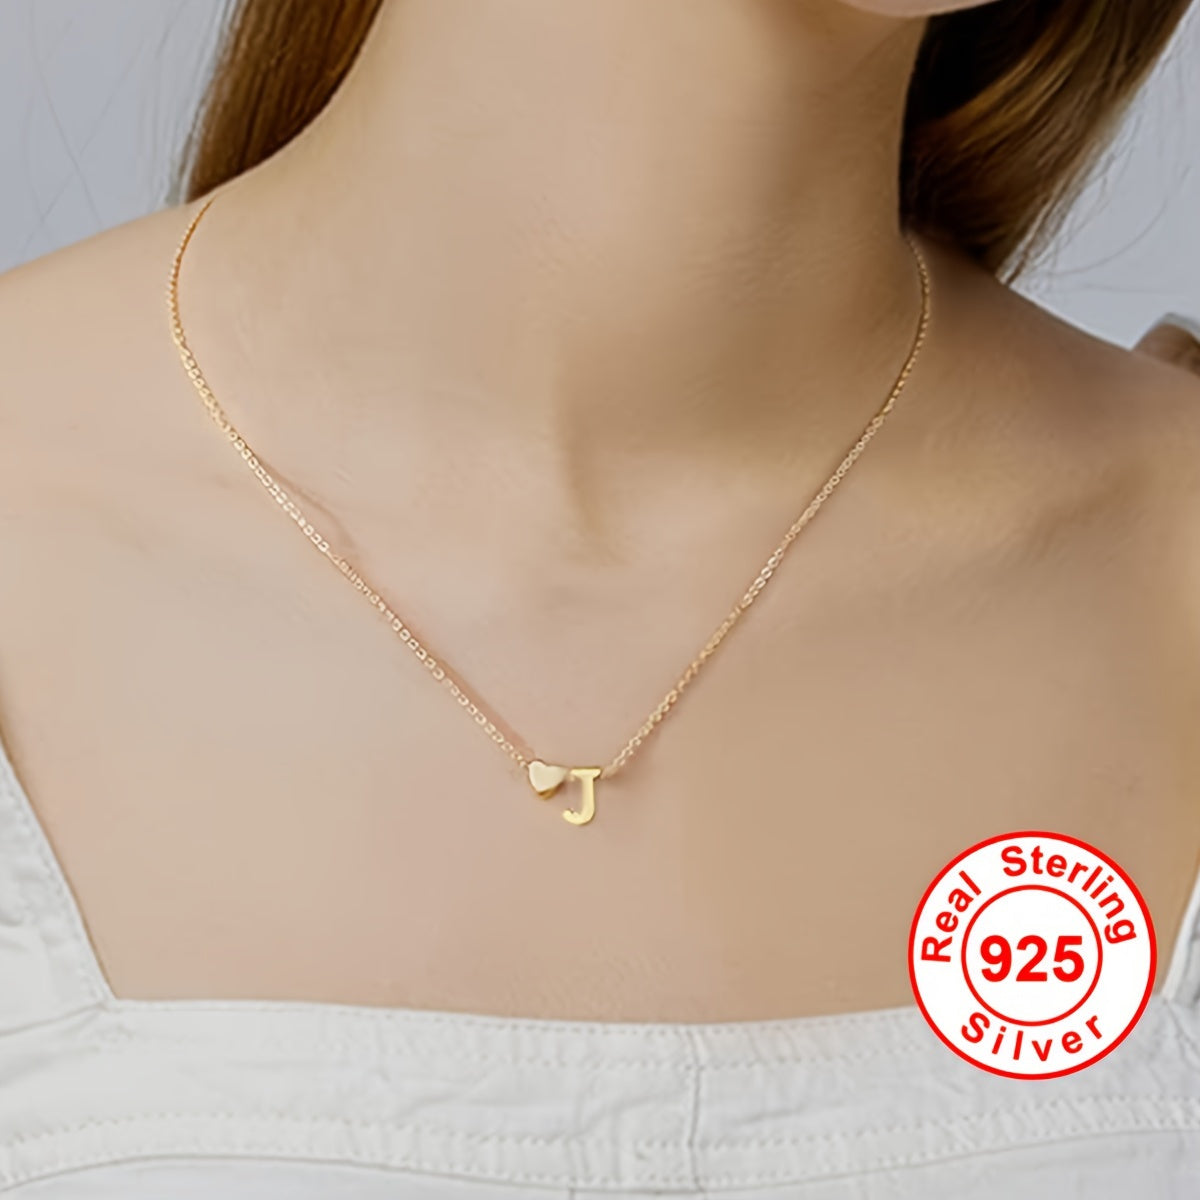 18K Gold Intial Necklace With Heart Pendant For Women, Custom Initial Necklace, Personalized Necklace, Elegant Love Necklace, Mother's Day Gift, Valentine's Day Gift, Holiday Gift